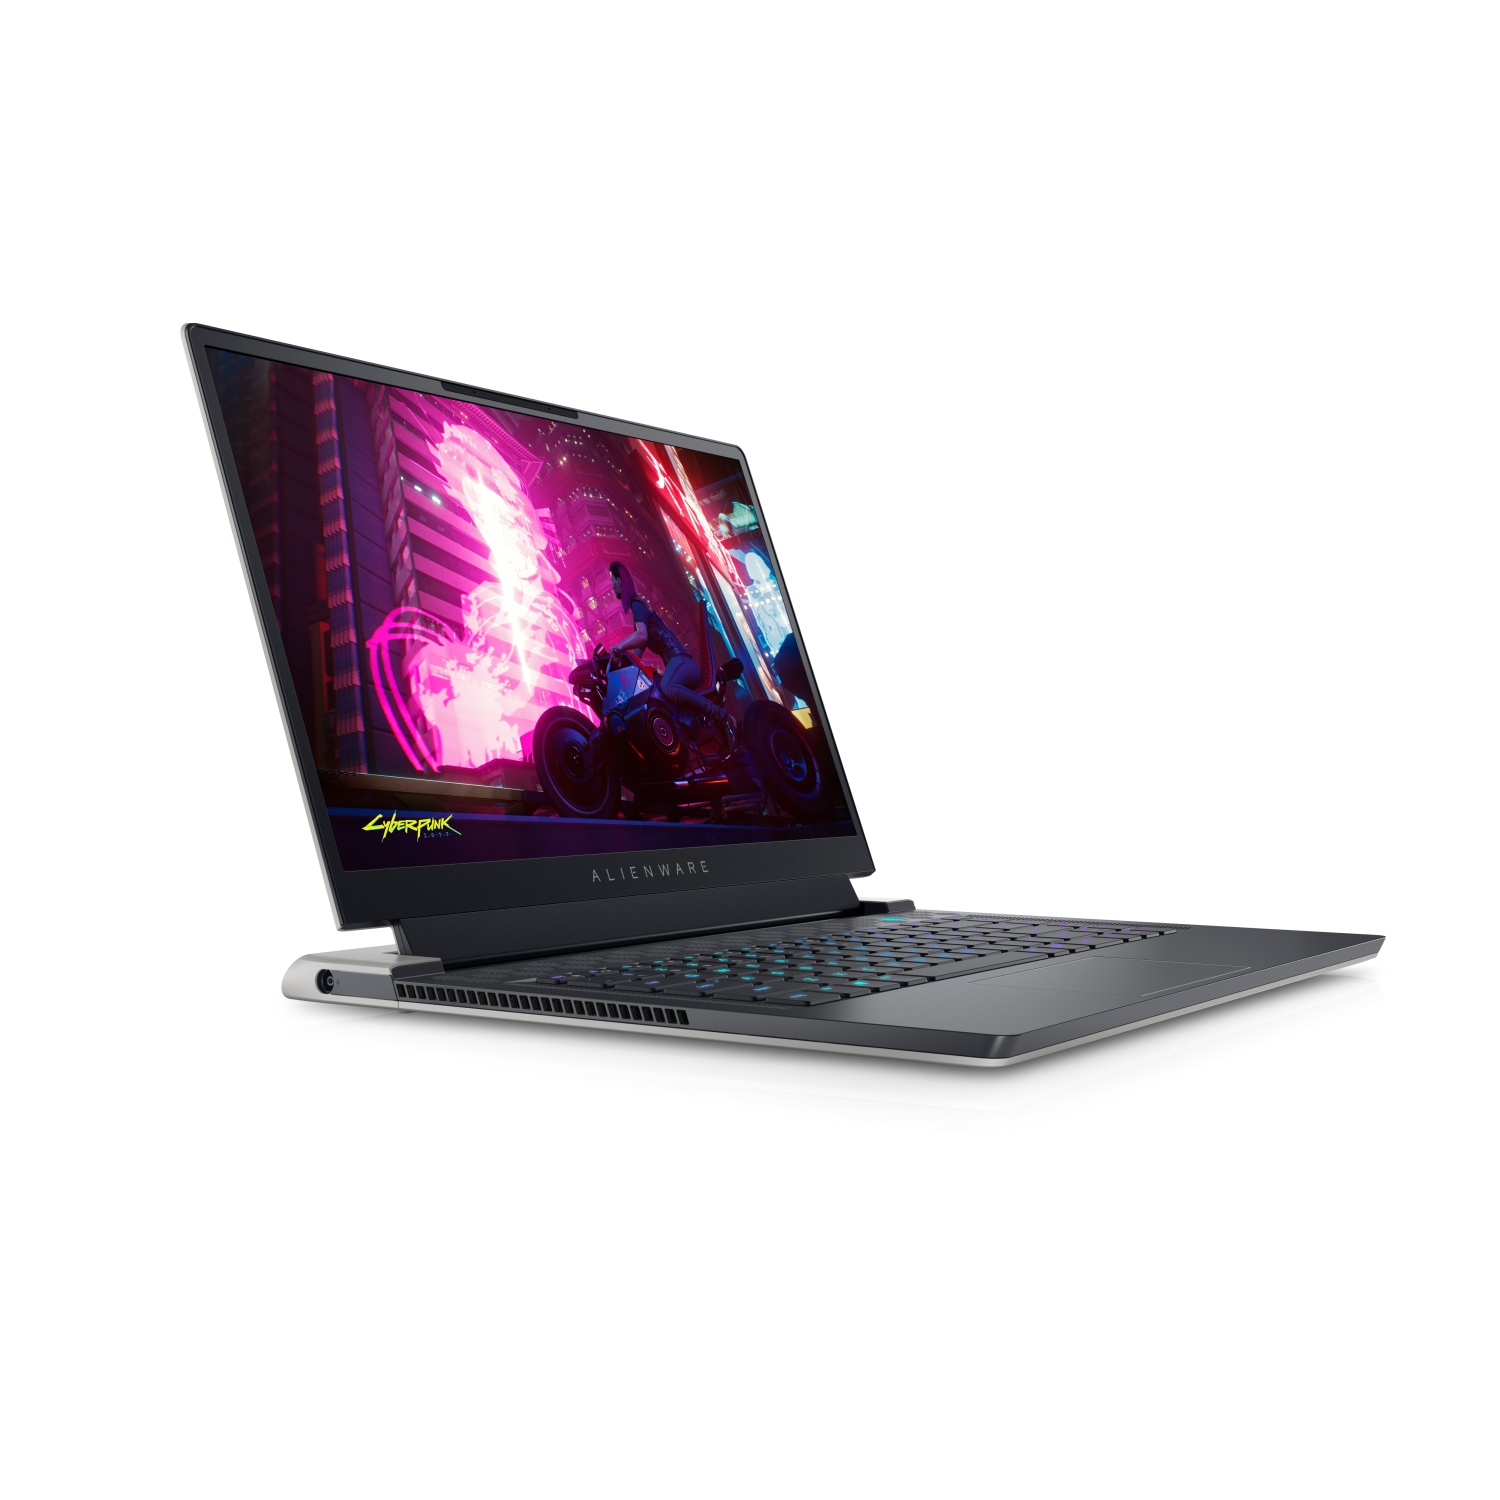 Refurbished (Excellent) - Dell Alienware X15 R1 Gaming Laptop (2021), 15.6" FHD, Core i7, 512GB SSD, 16GB RAM, RTX 3070, 8 Cores @ 4.6 GHz, 11th Gen CPU Certified